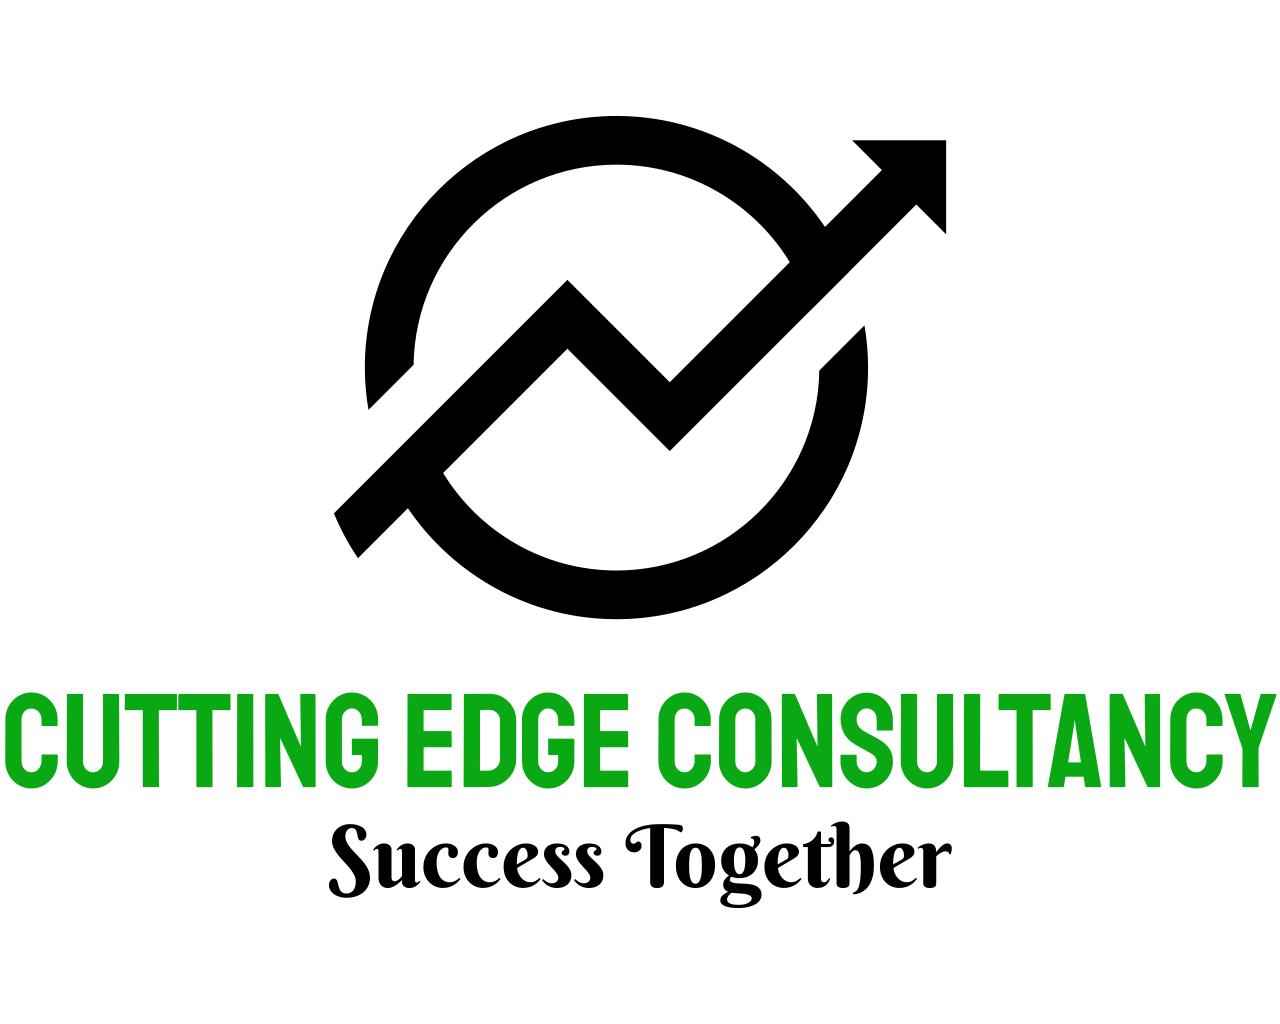 Cutting Edge Consultancy | Success Together